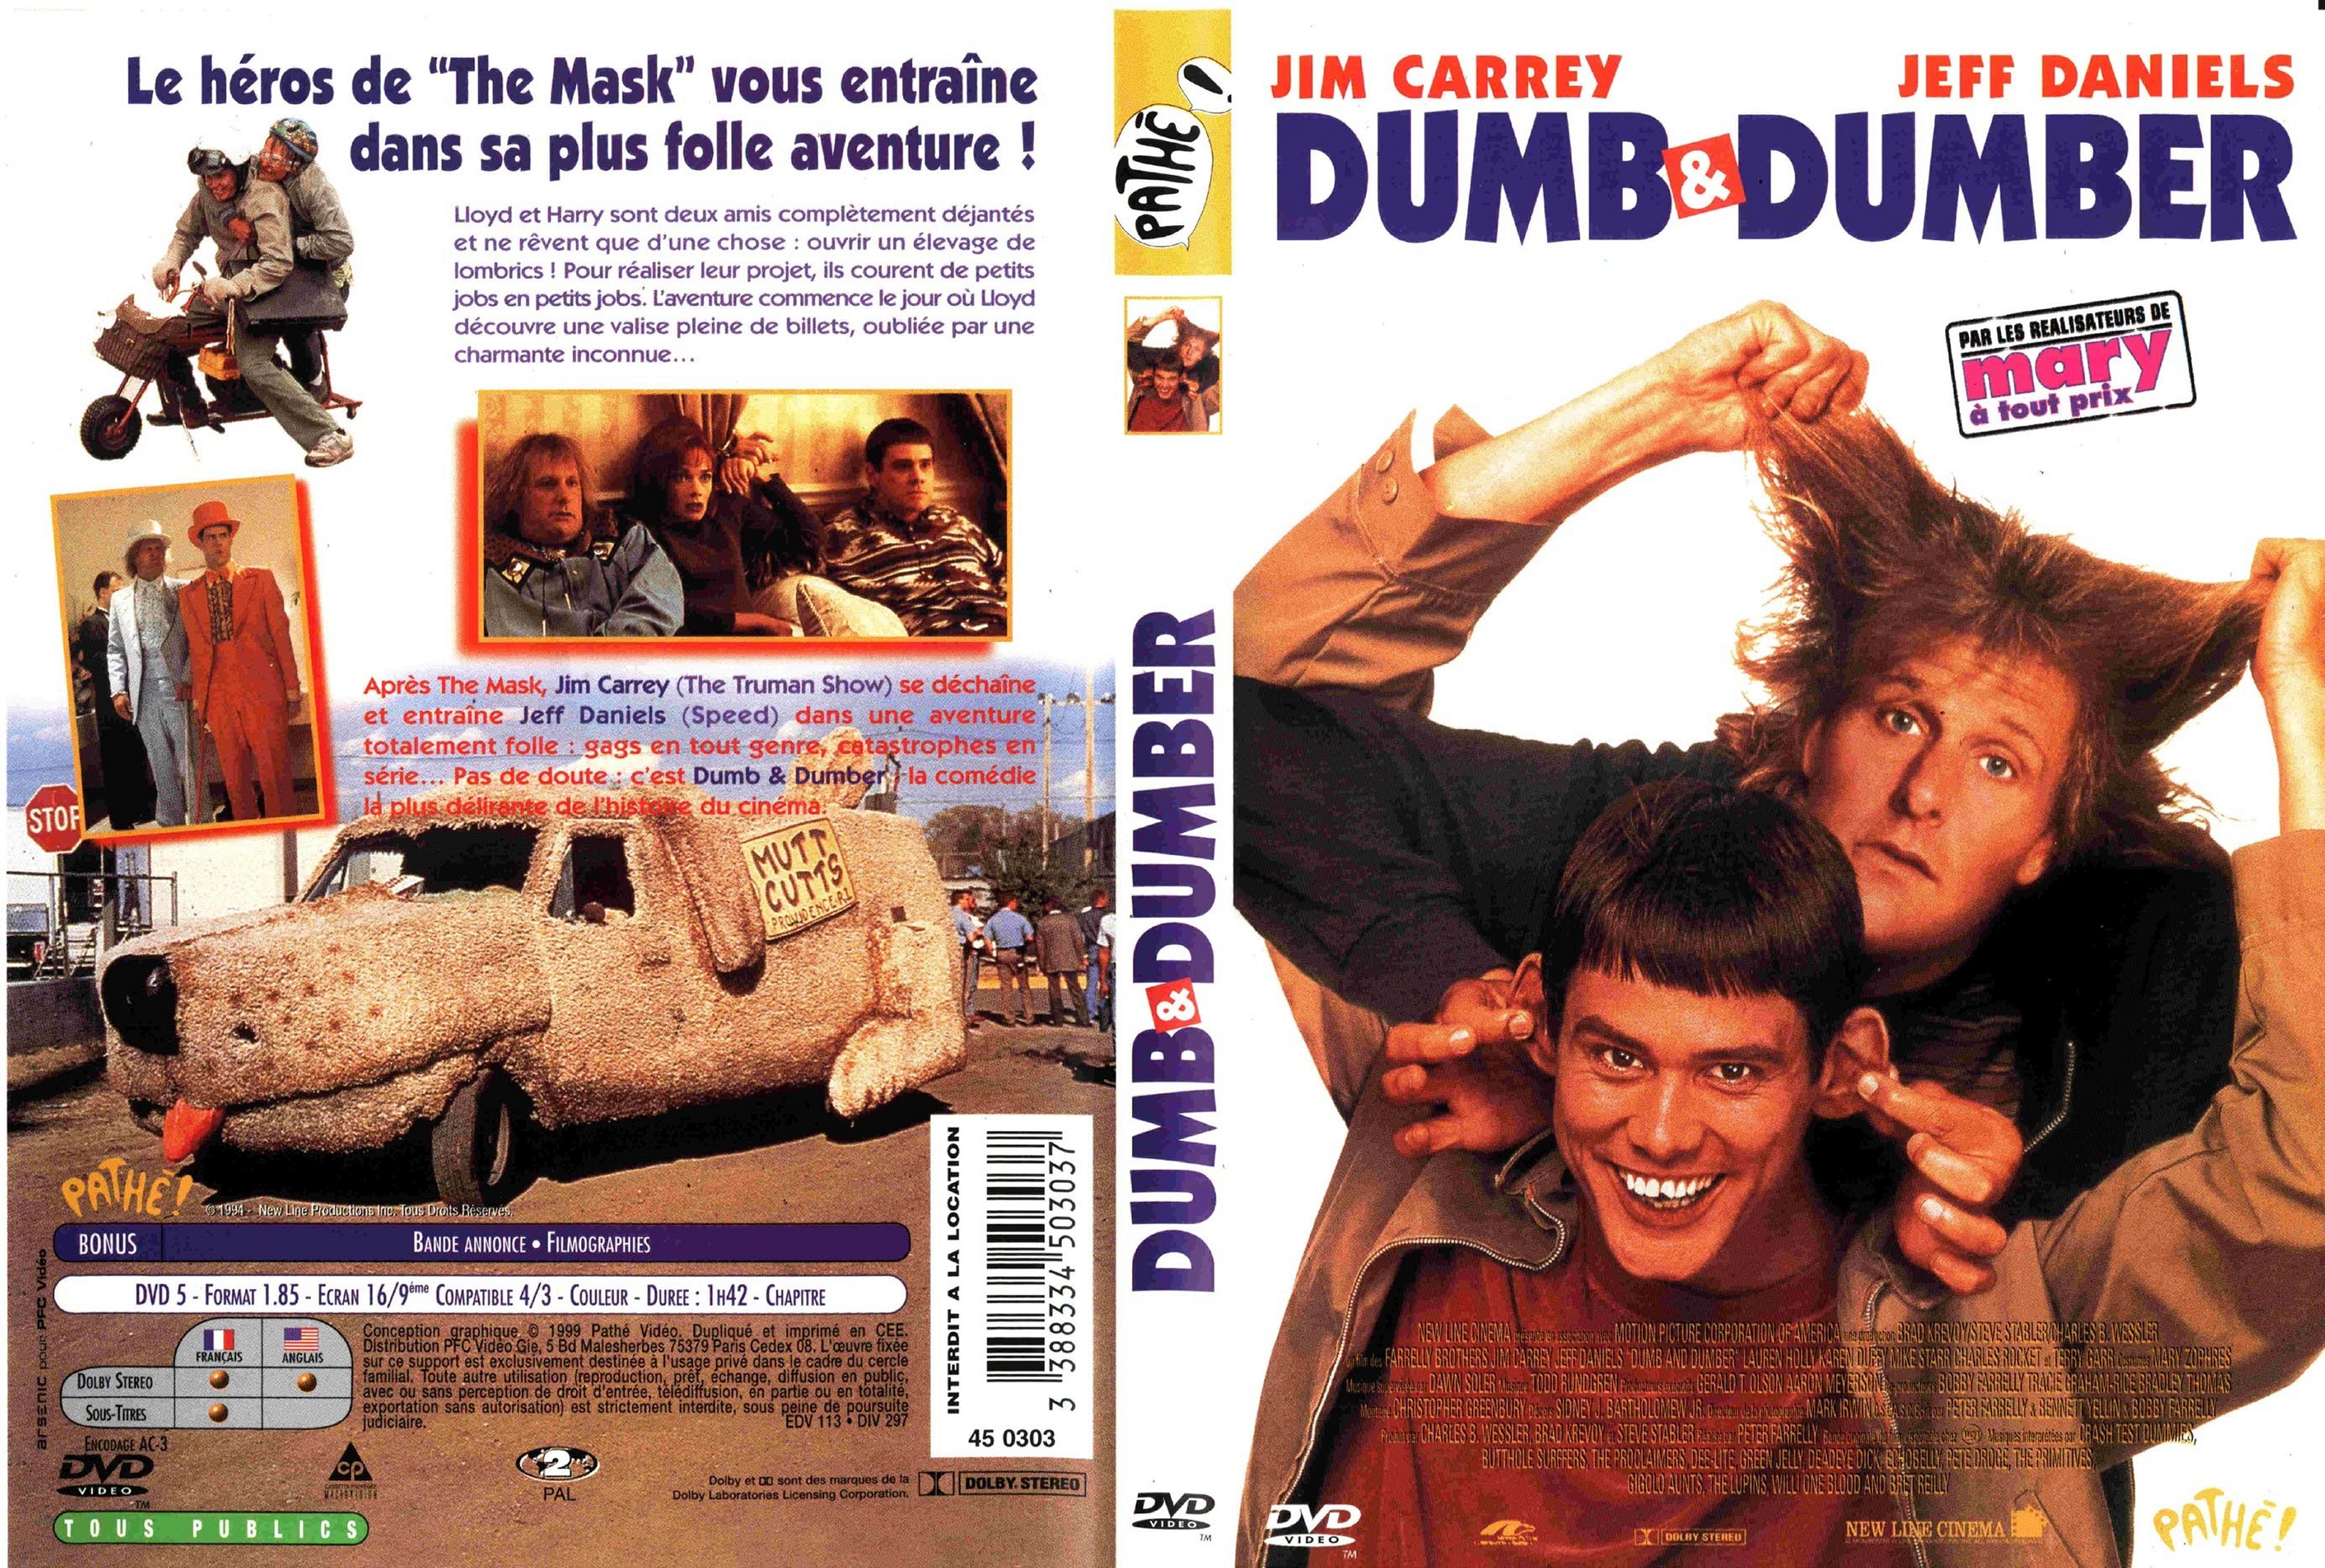 Jaquette DVD Dumb and Dumber